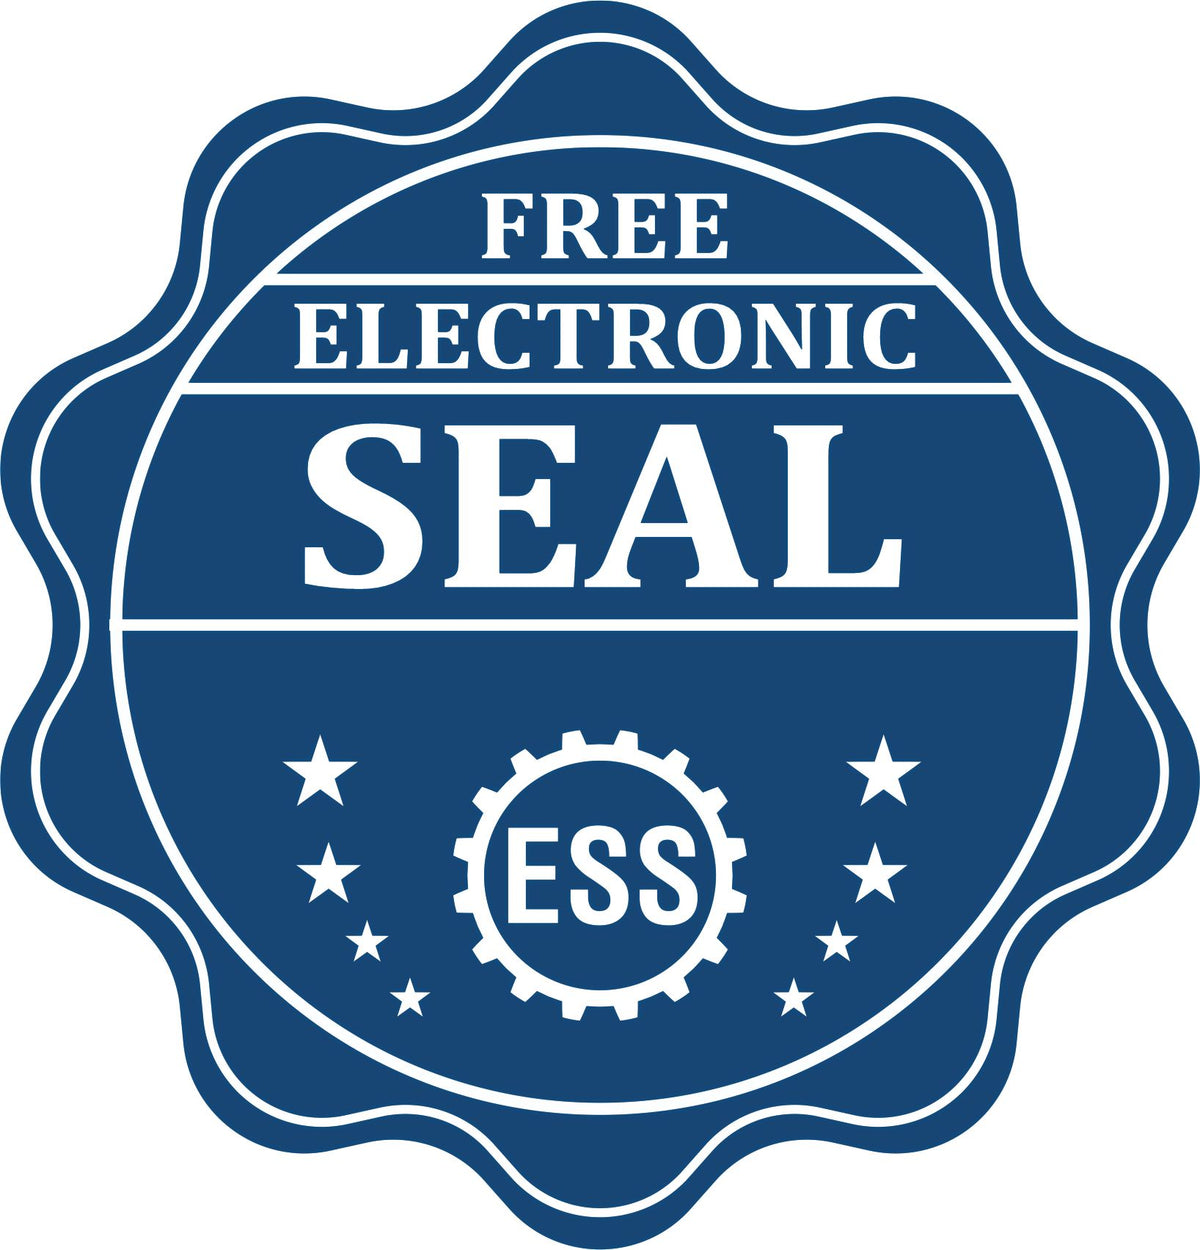 A badge showing a free electronic seal for the Super Slim Nevada Notary Public Stamp with stars and the ESS gear on the emblem.